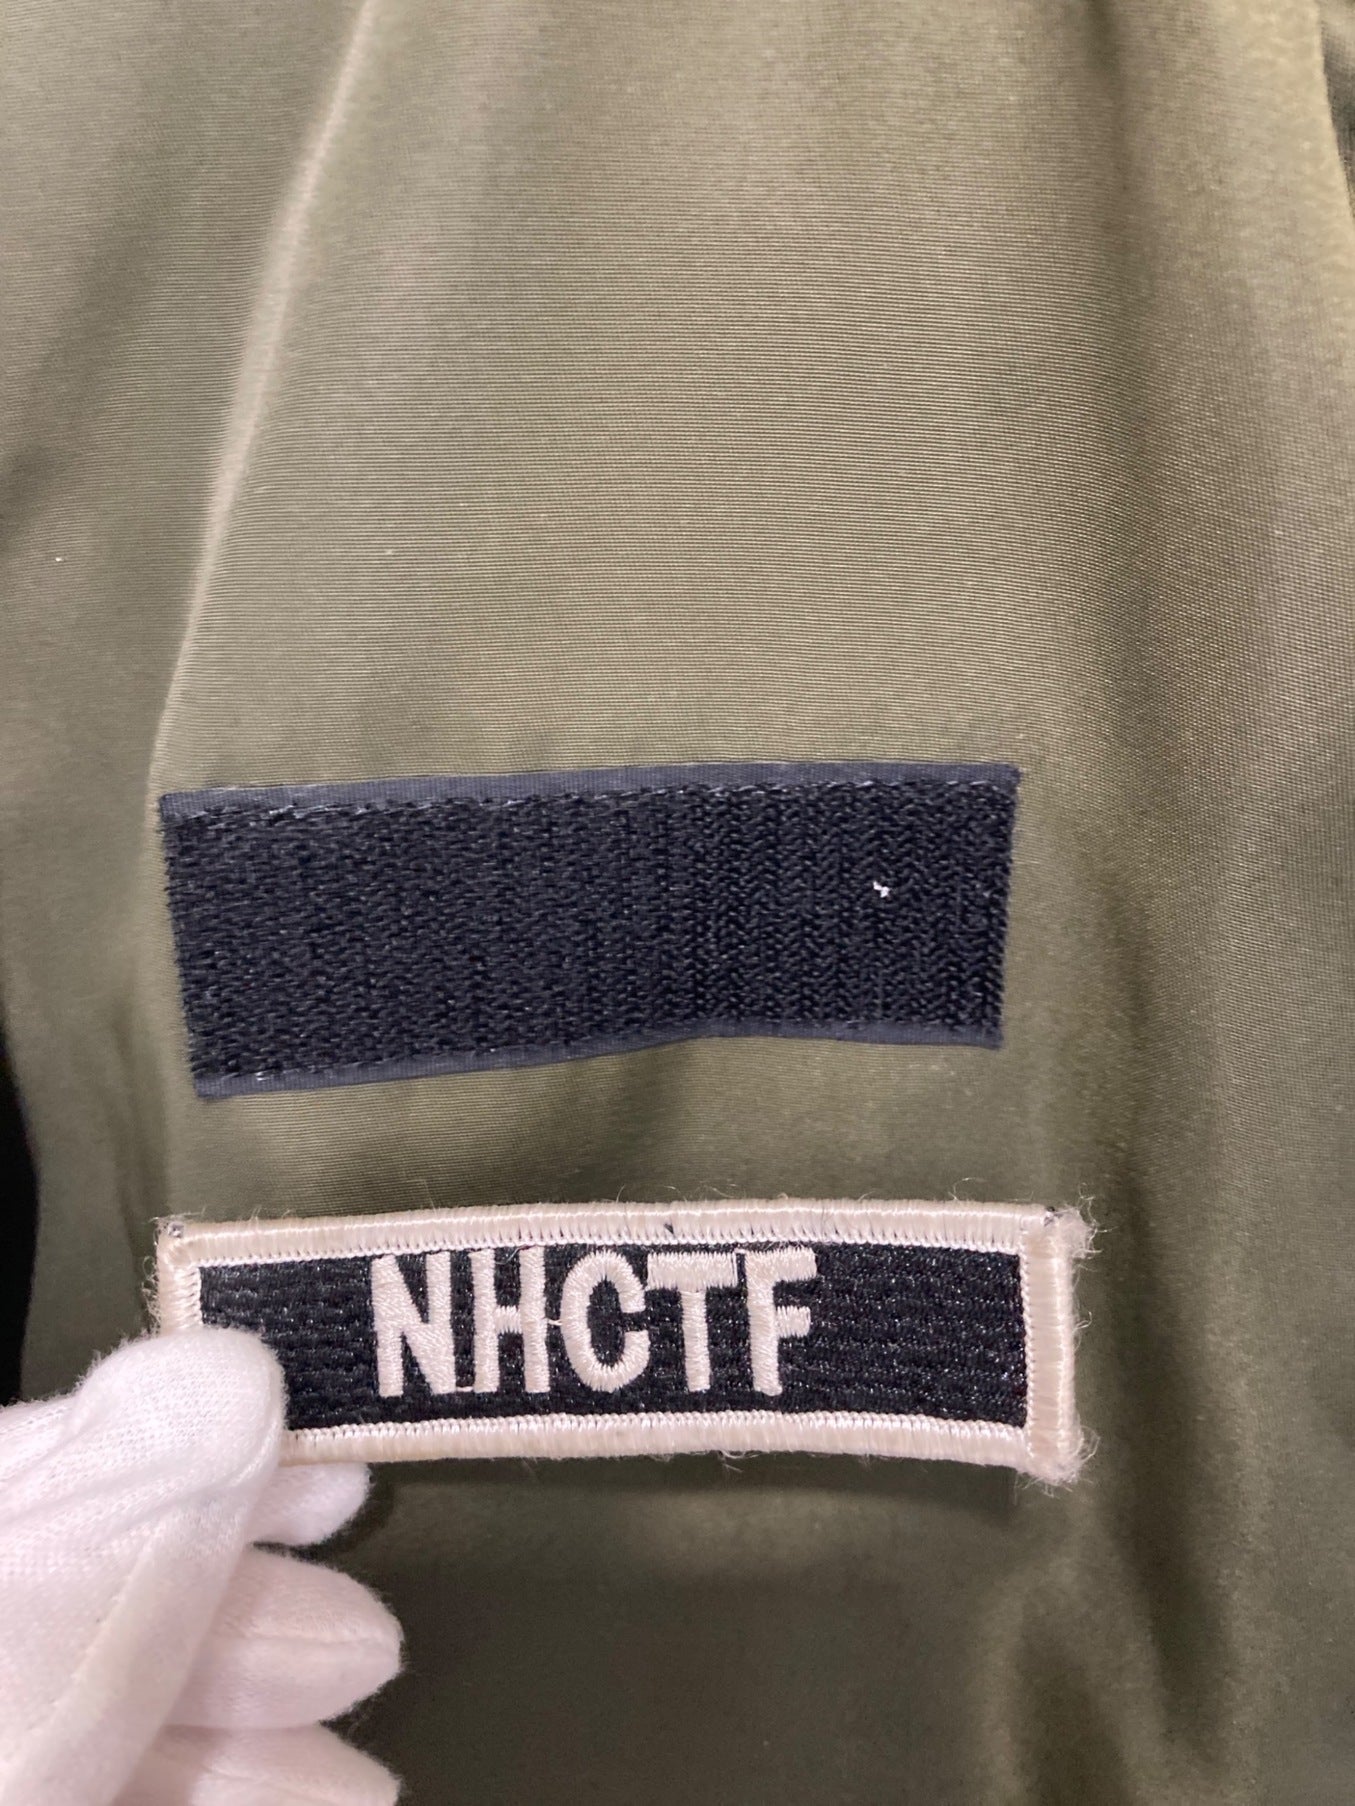 [Pre-owned] NEIGHBORHOOD 90s MA-1 Flight Jacket with K-9 Patch